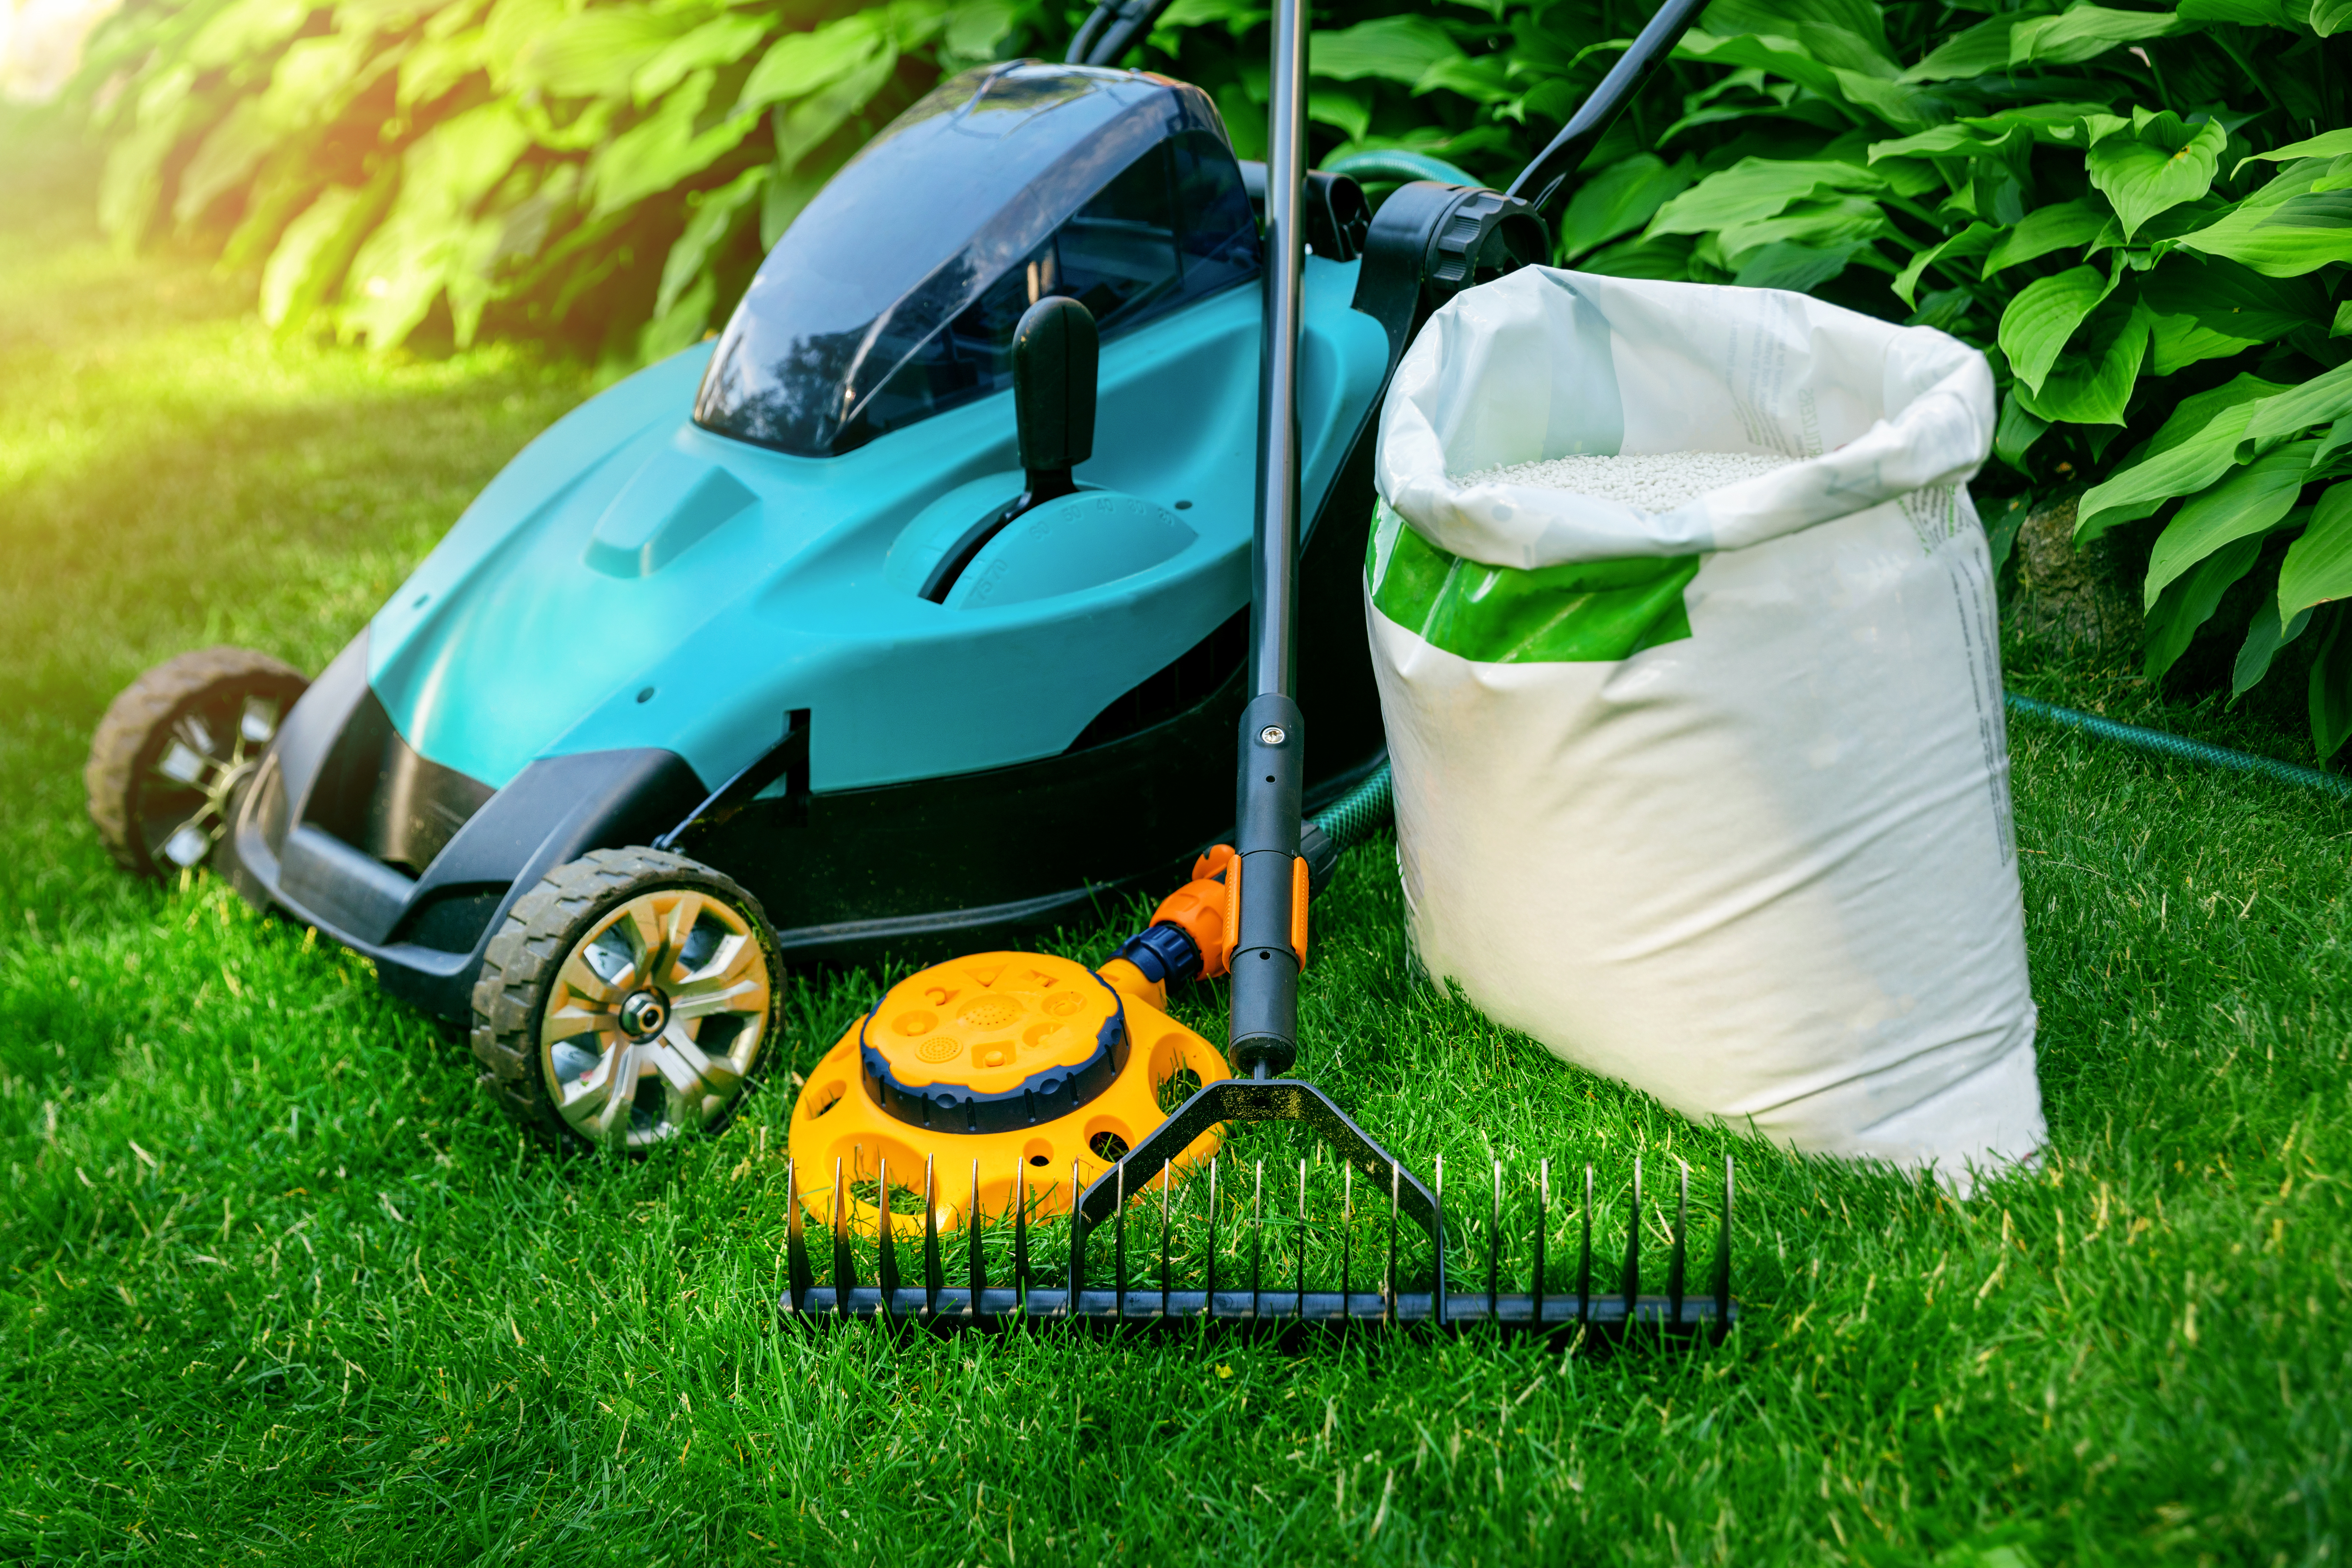 gardening tools and lawn care equipment on green grass